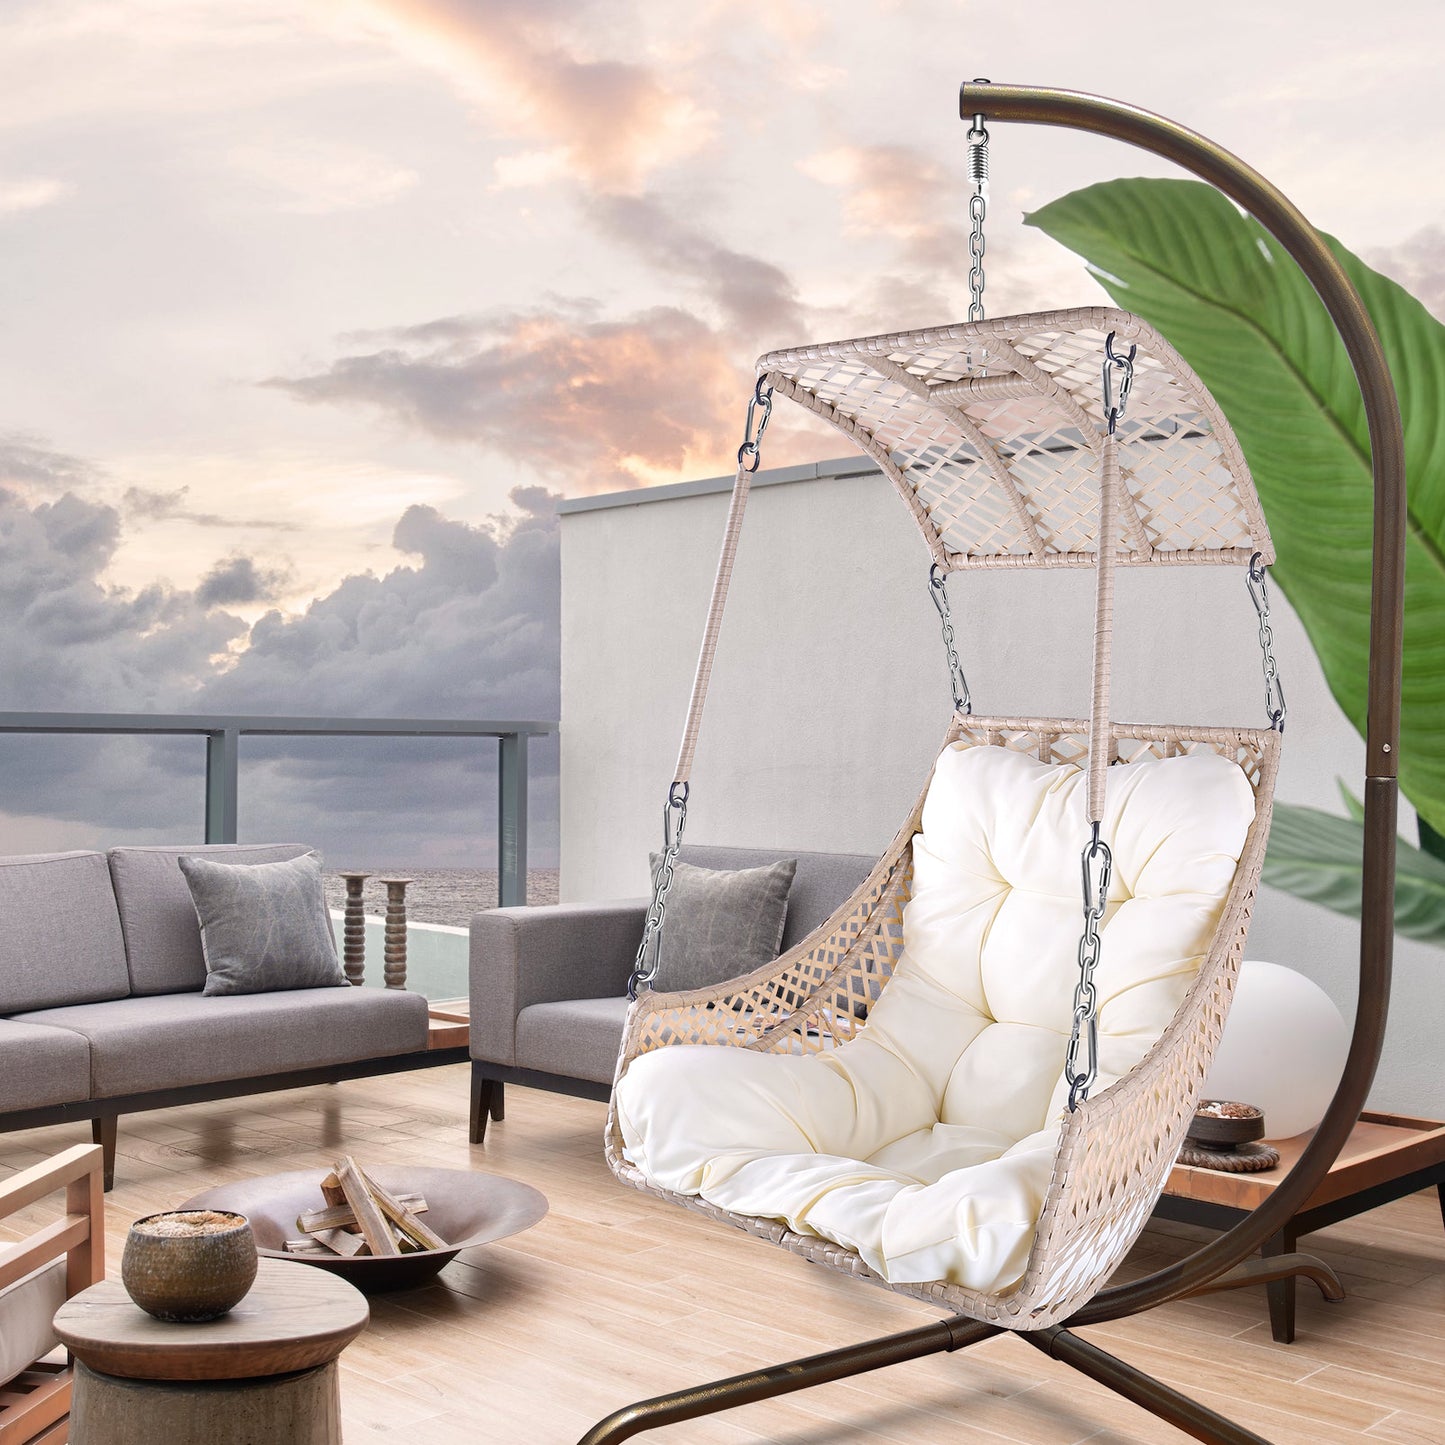 Swing Egg Chair with Stand Indoor Outdoor, UV Resistant Cushion Hanging Chair with Cup Holder, Anti-Rust with Wicker Rattan Frame 350lbs Capacity Hammock Chair for Patio Bedroom-Beige, New Design